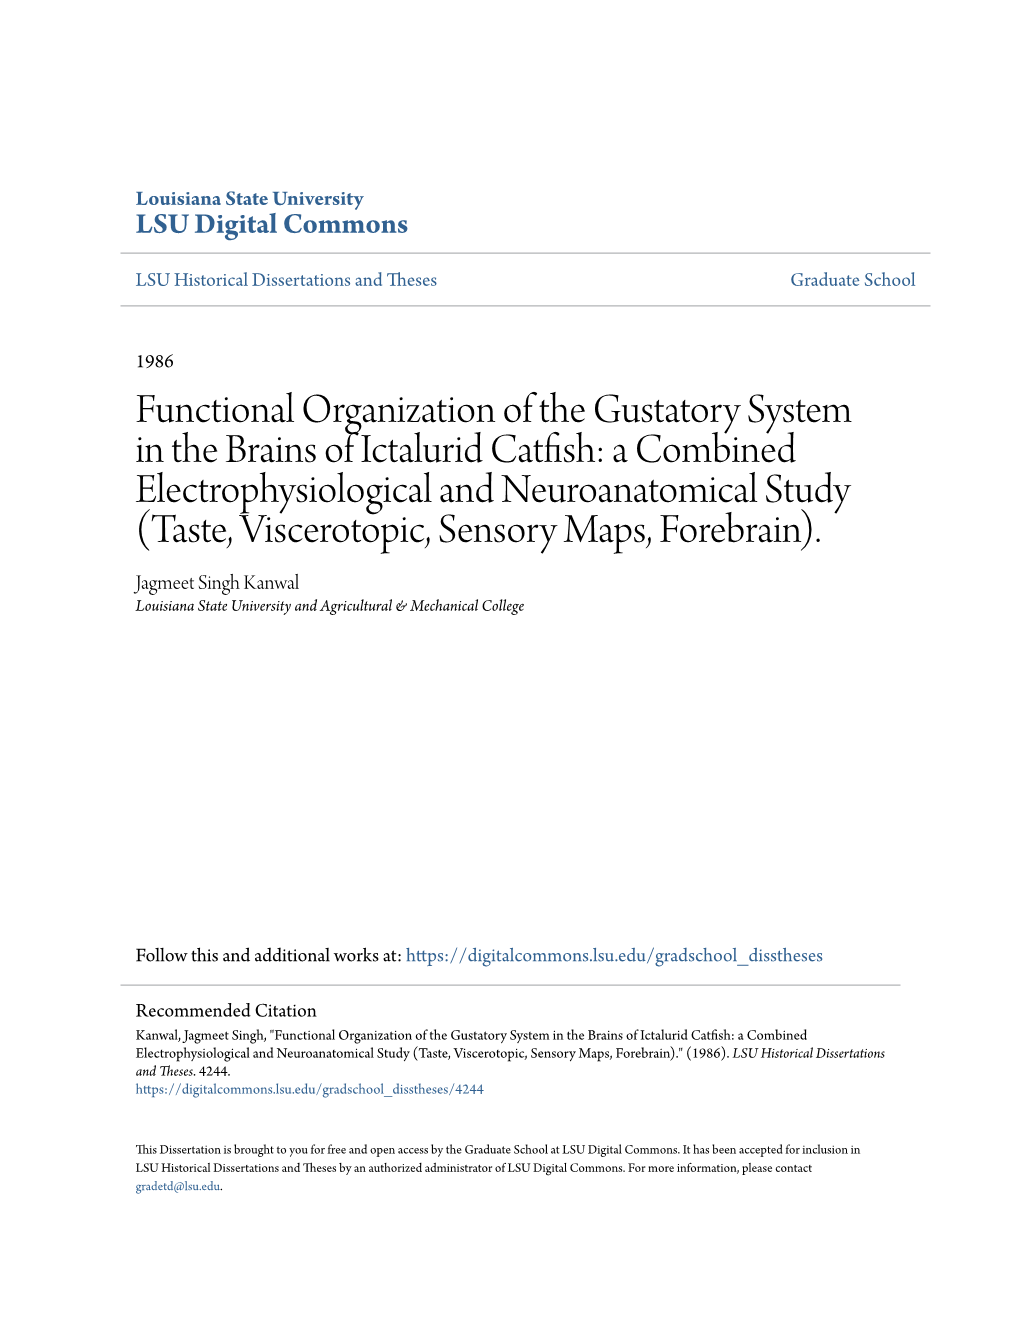 Functional Organization of the Gustatory System in The